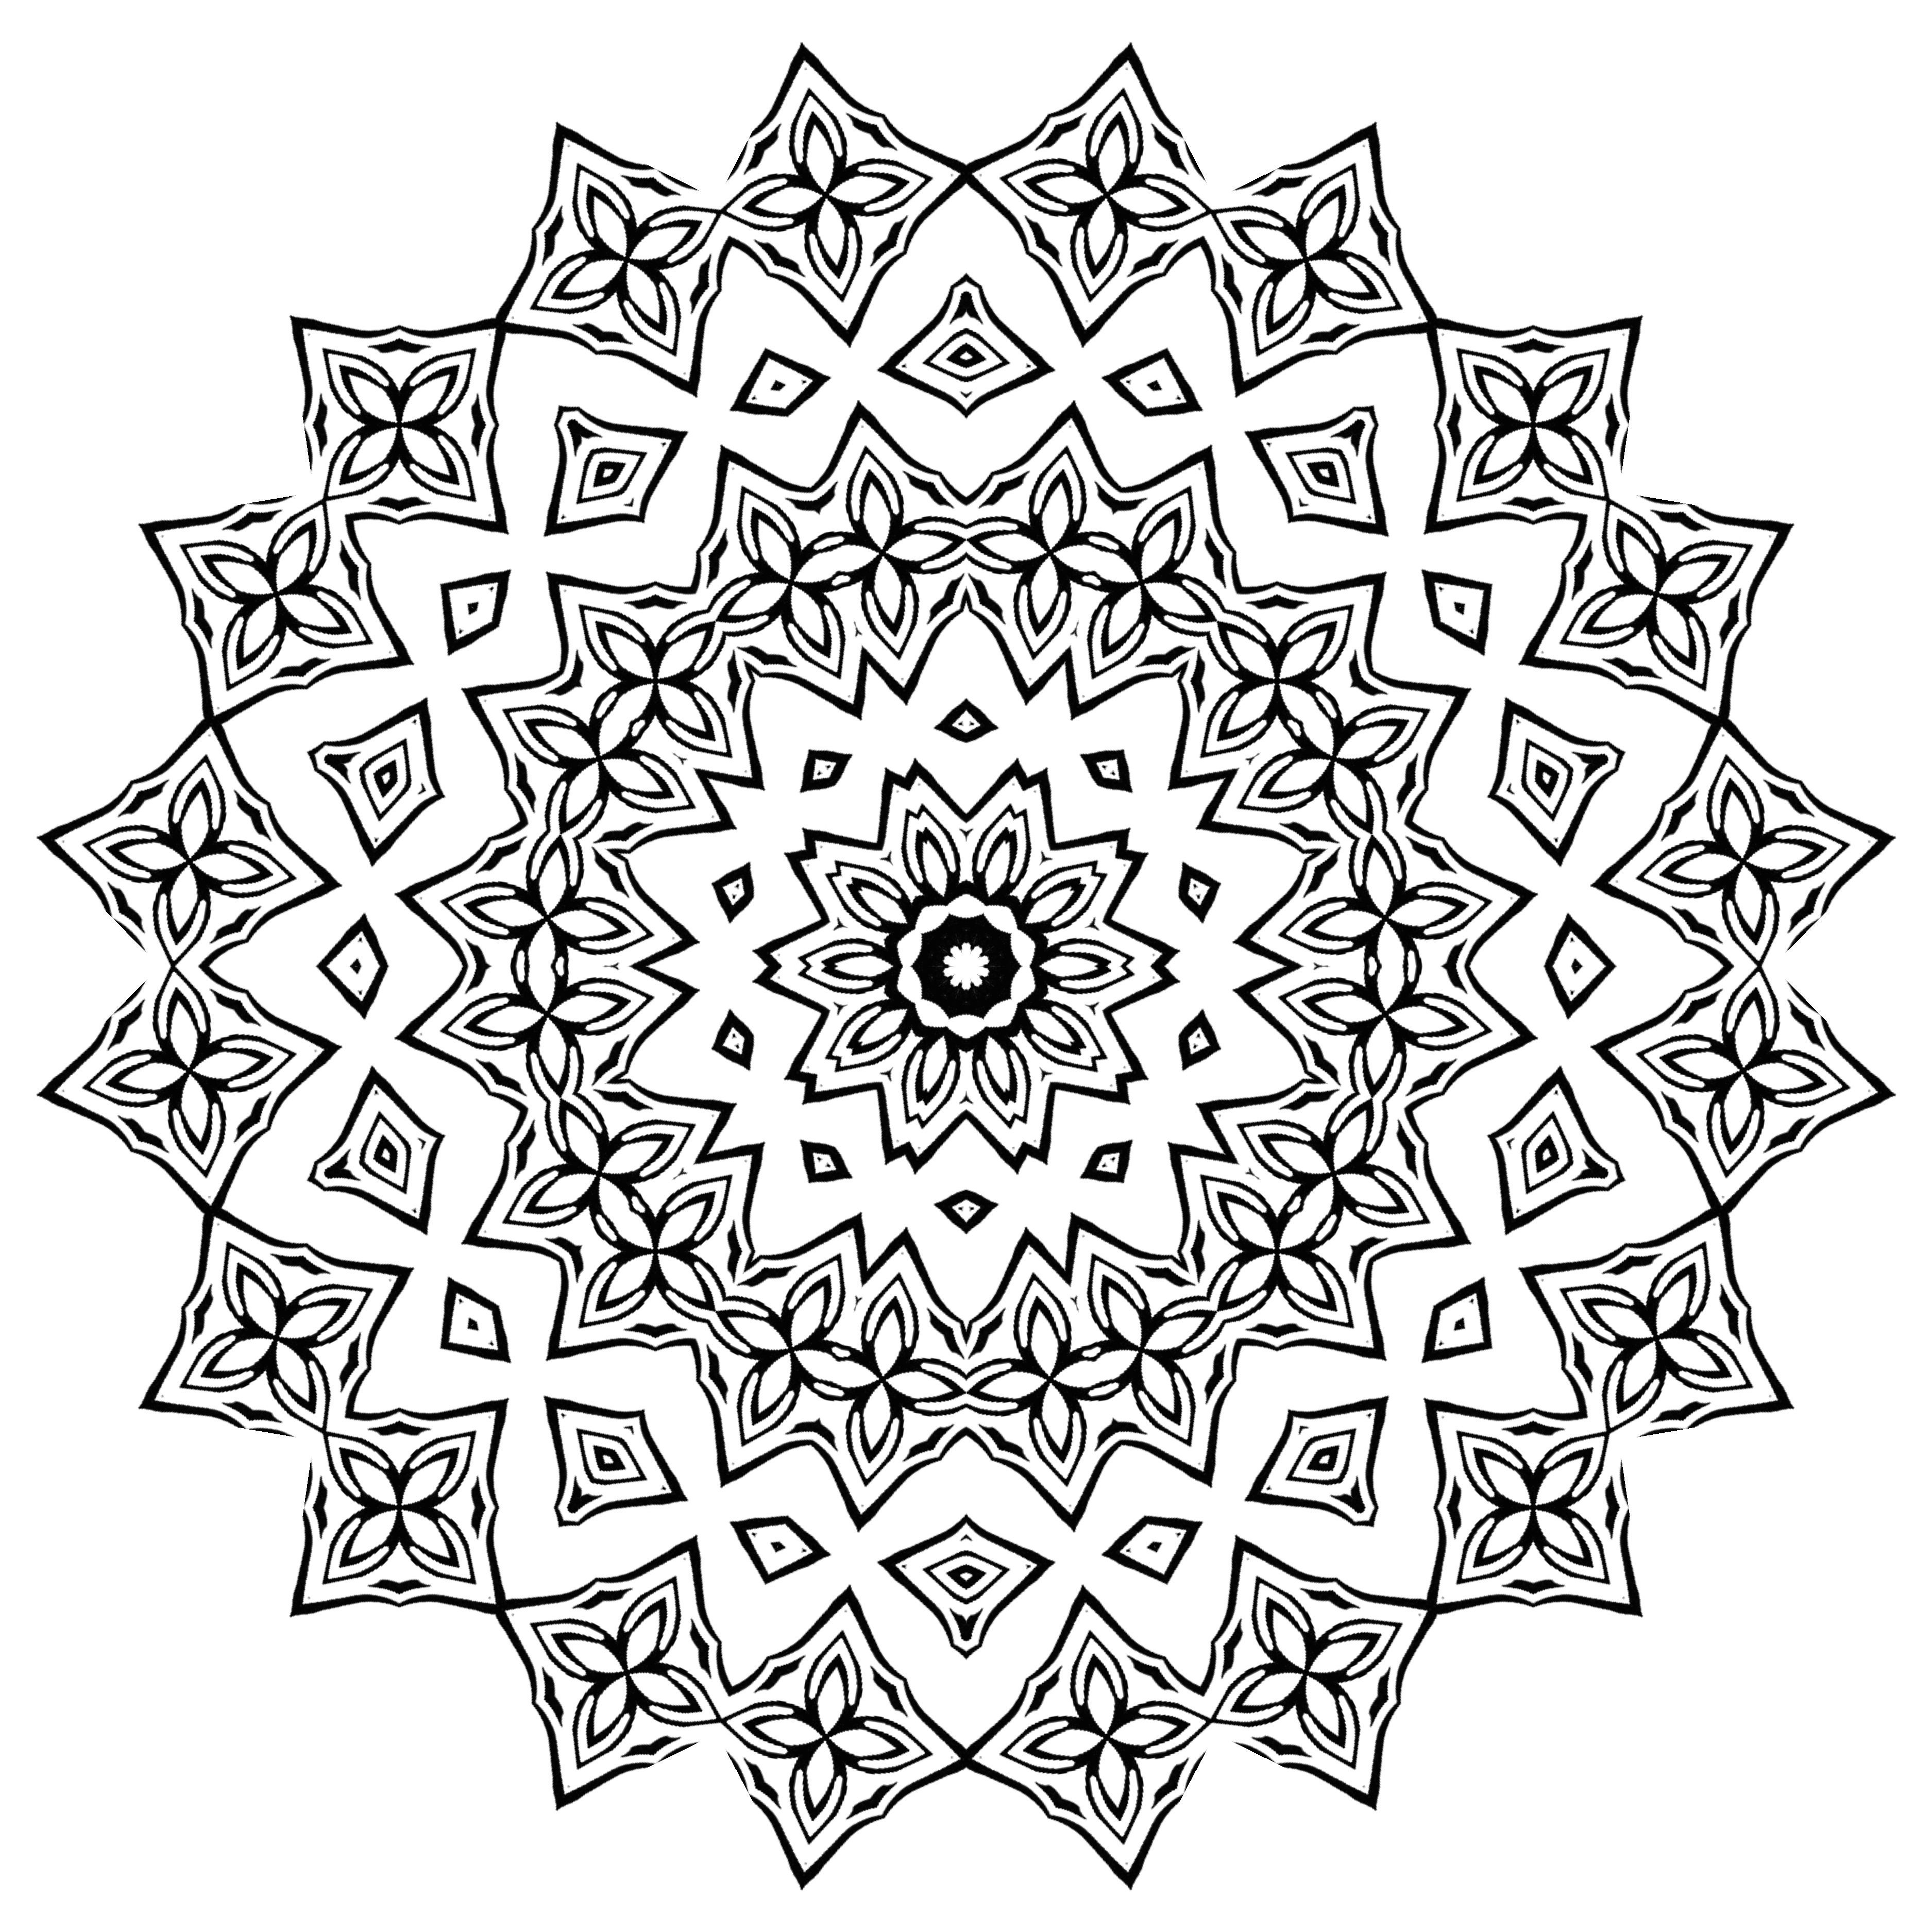 45 FREE adult coloring pages Mandala & Abstract to reduce stress